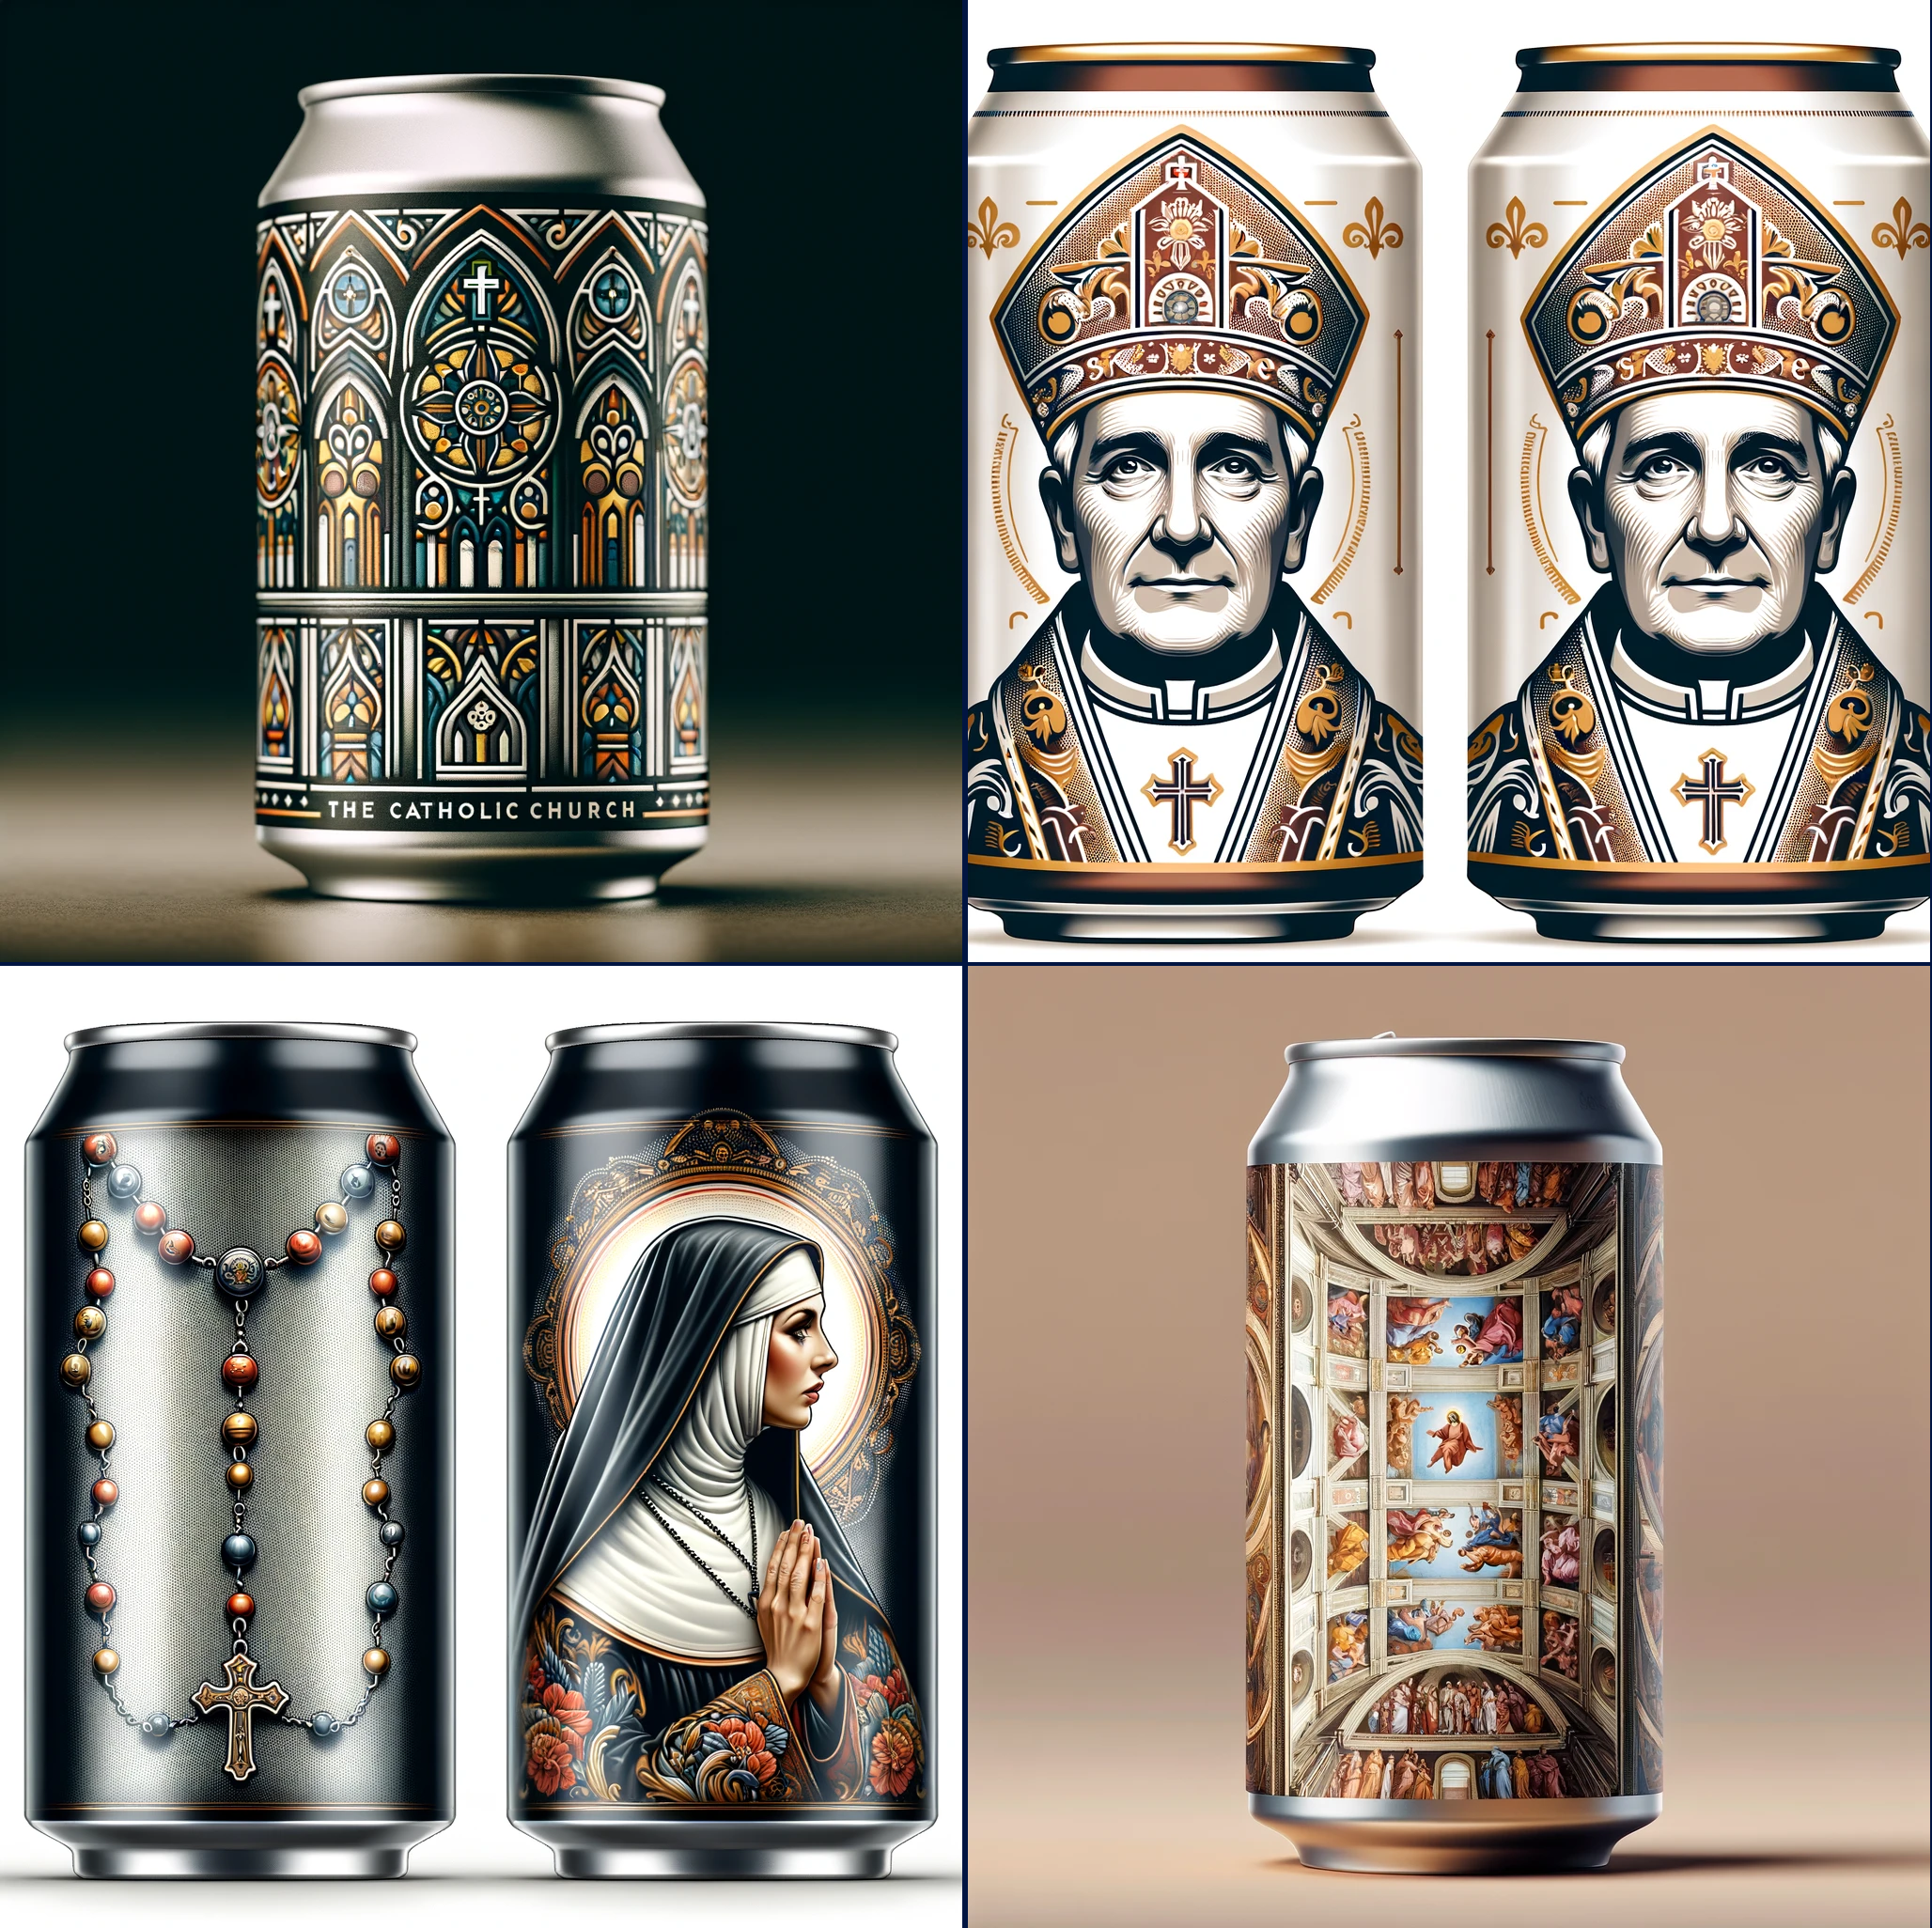 Four panels representing different beer can designs with imagery from the catholic church, such as stained glass, a pope, a nun, and the Sistine Chapel